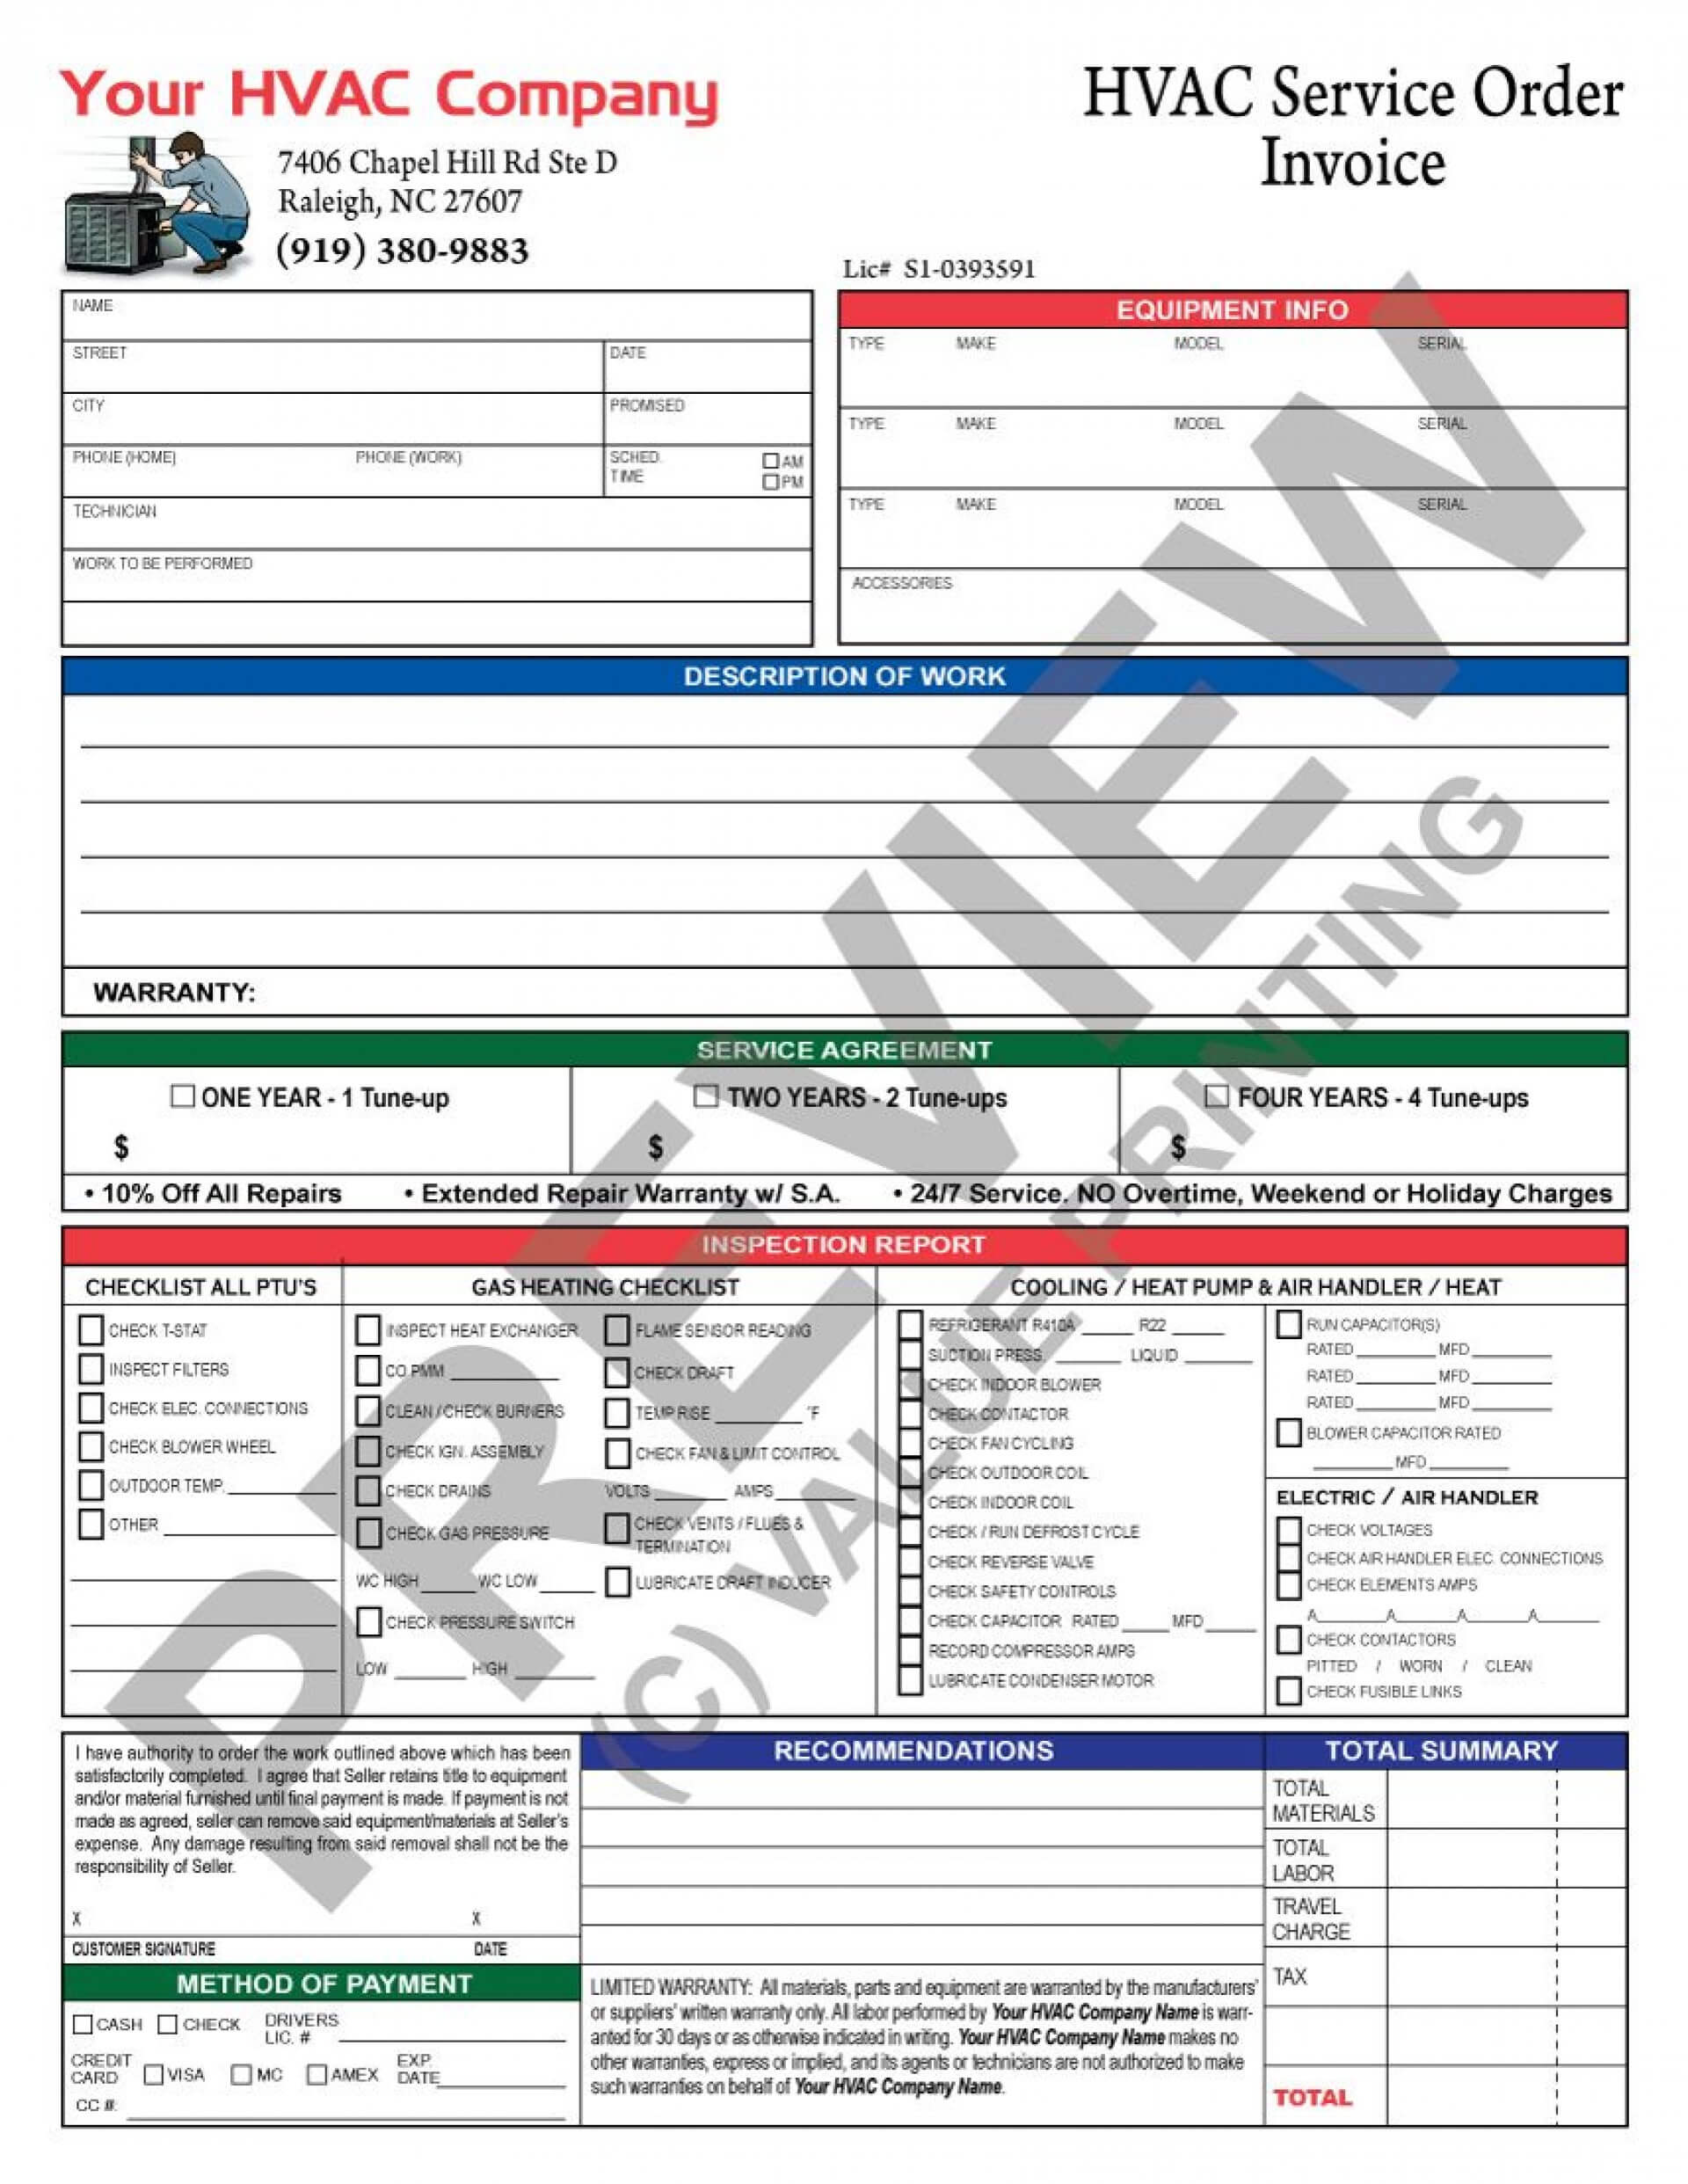 031 Openworkorders Template Ideas Hvac Service Striking Inside Air Conditioning Invoice Template